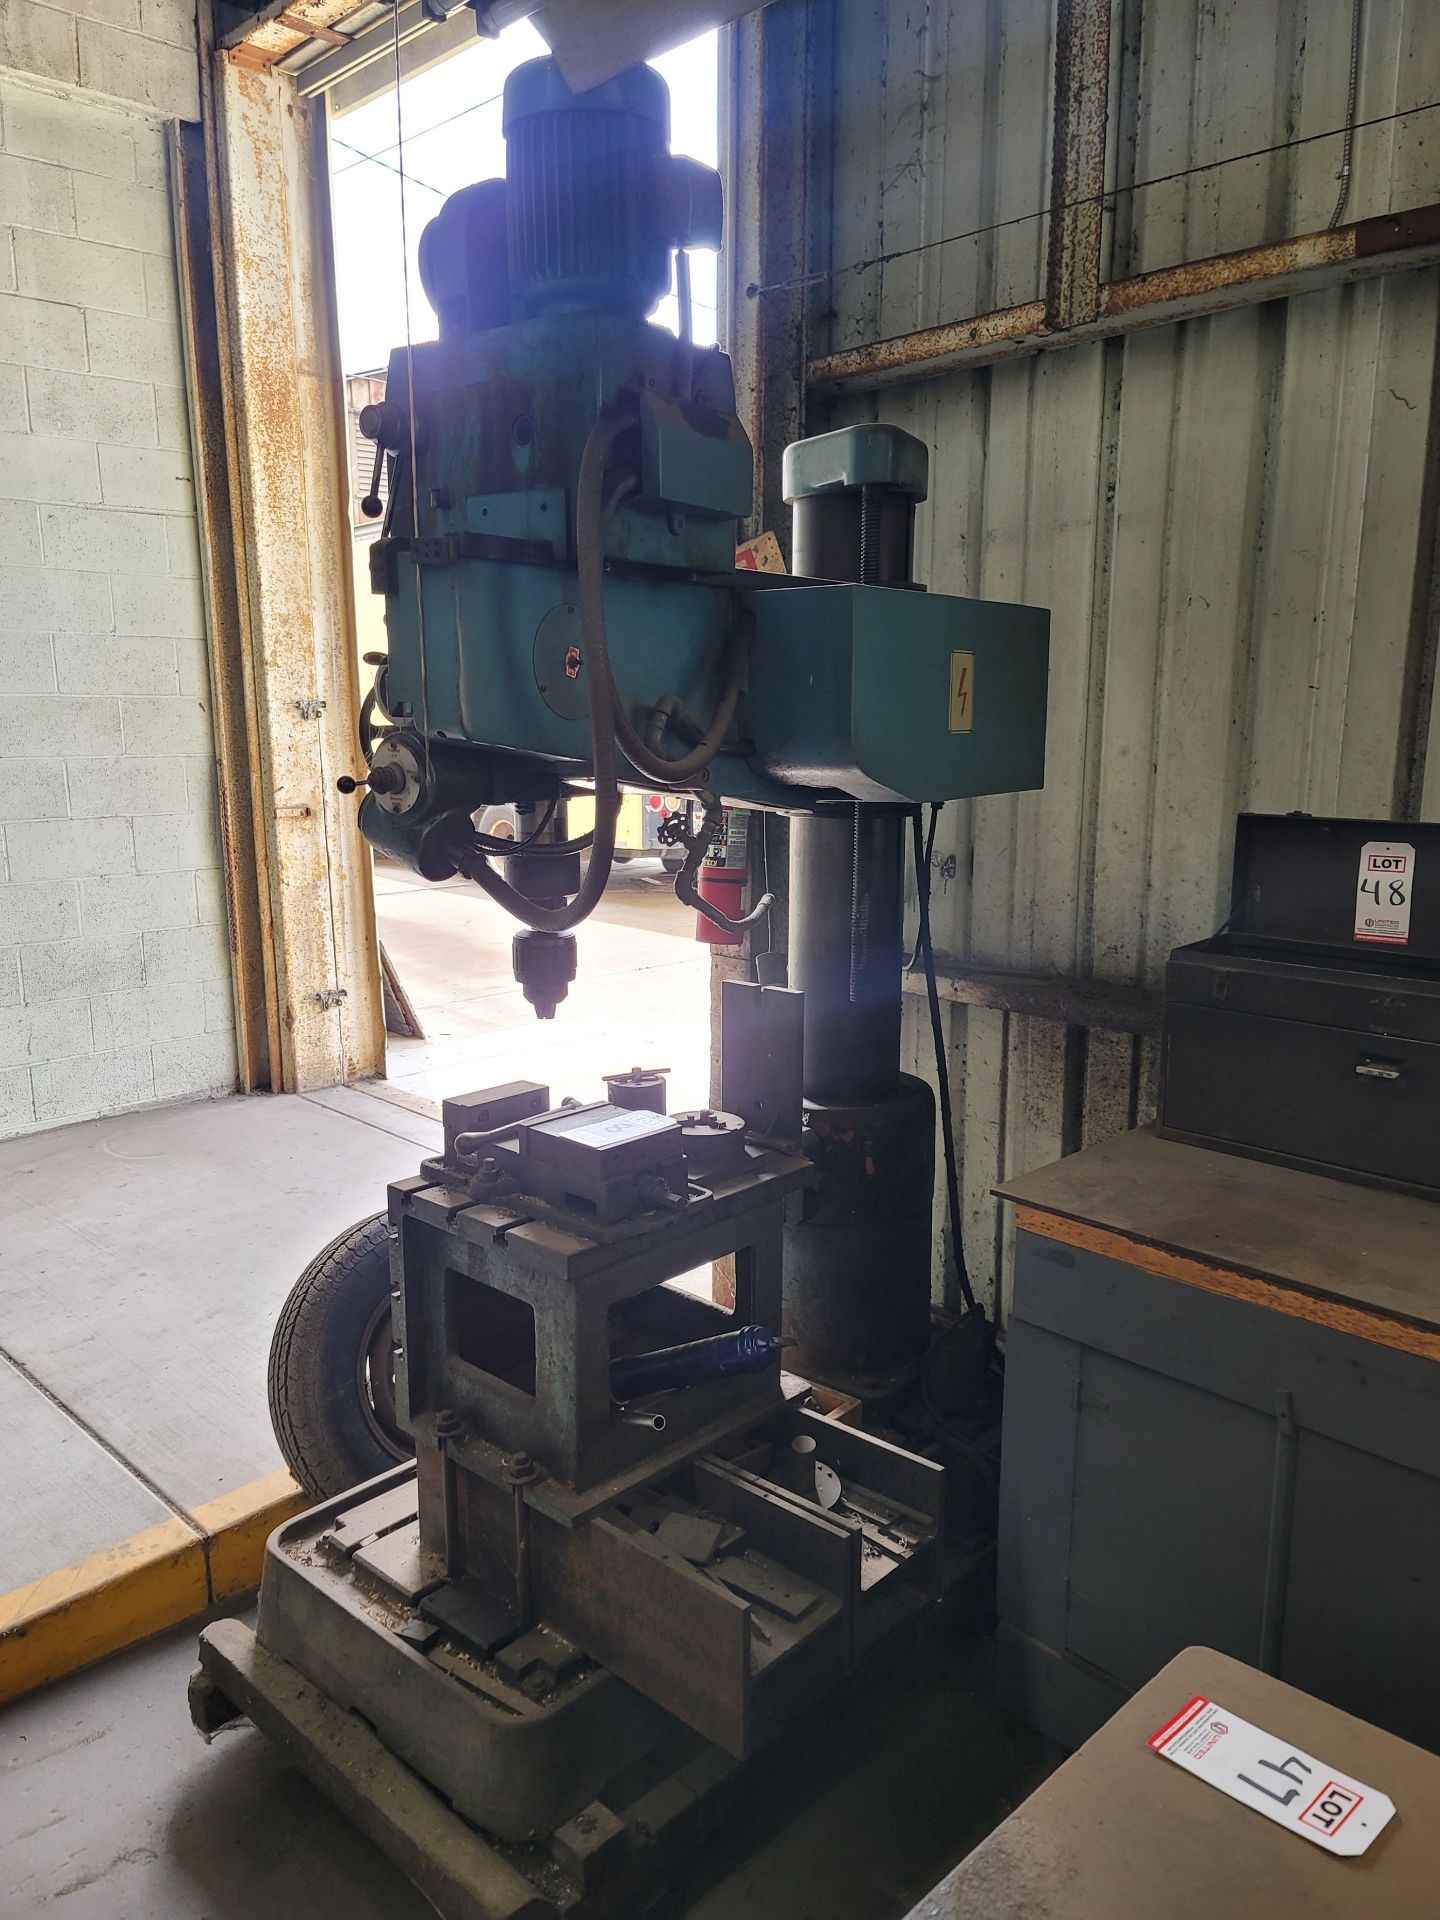 LUX DRILL RADIAL ARM DRILL, MODEL 832, S/N 7765, W/ T-SLOT ANGLE BLOCK - Image 2 of 8